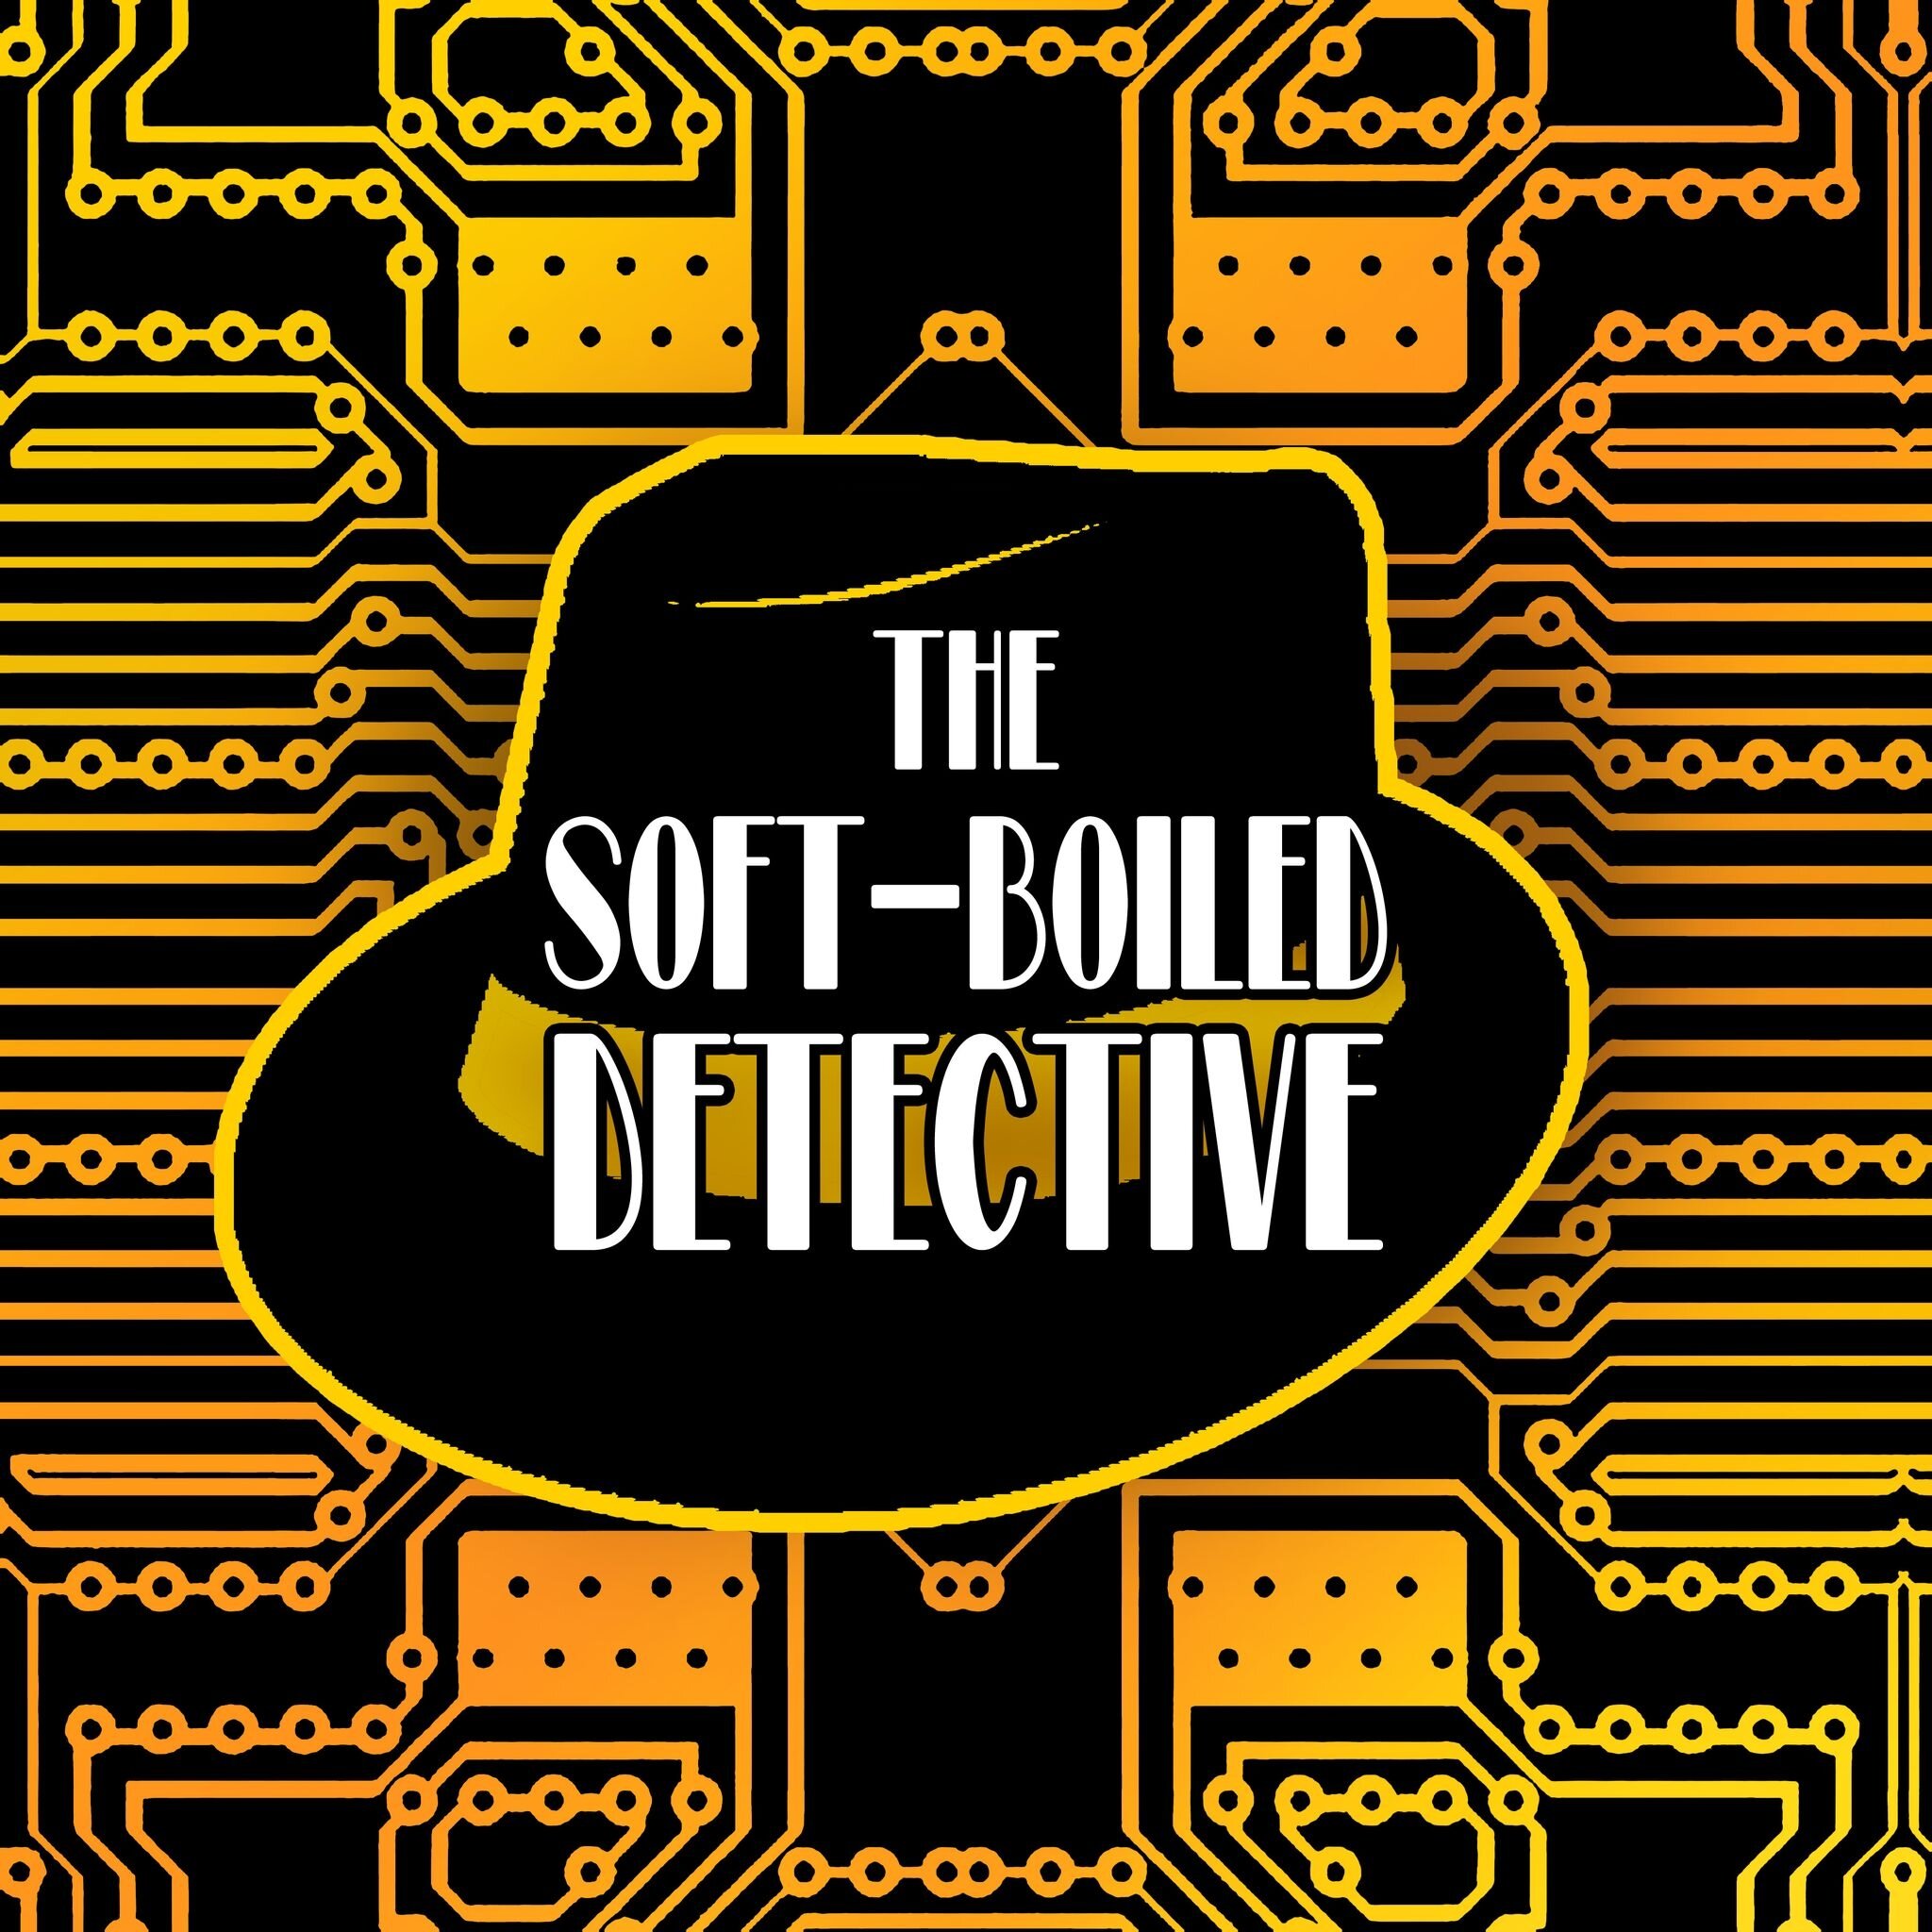 The Soft-Boiled Detective